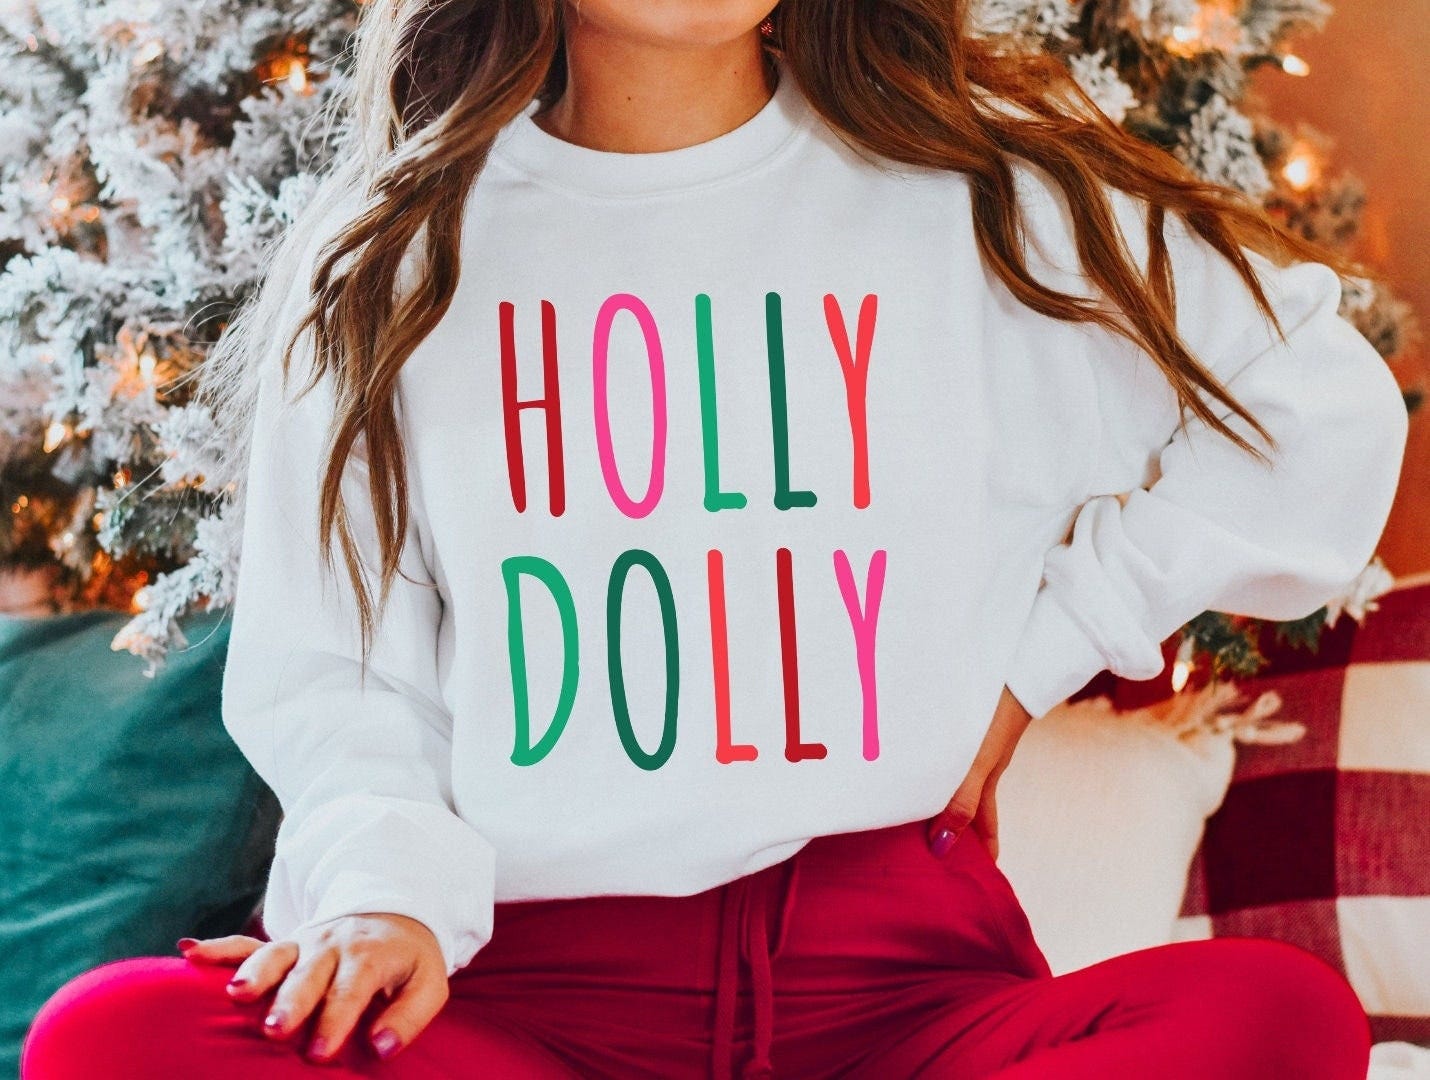 Have a Holly Dolly Christmas Sweatshirt for Fans of Country Music Sweatshirt for Christmas, Unisex Sweatshirt for Christmas